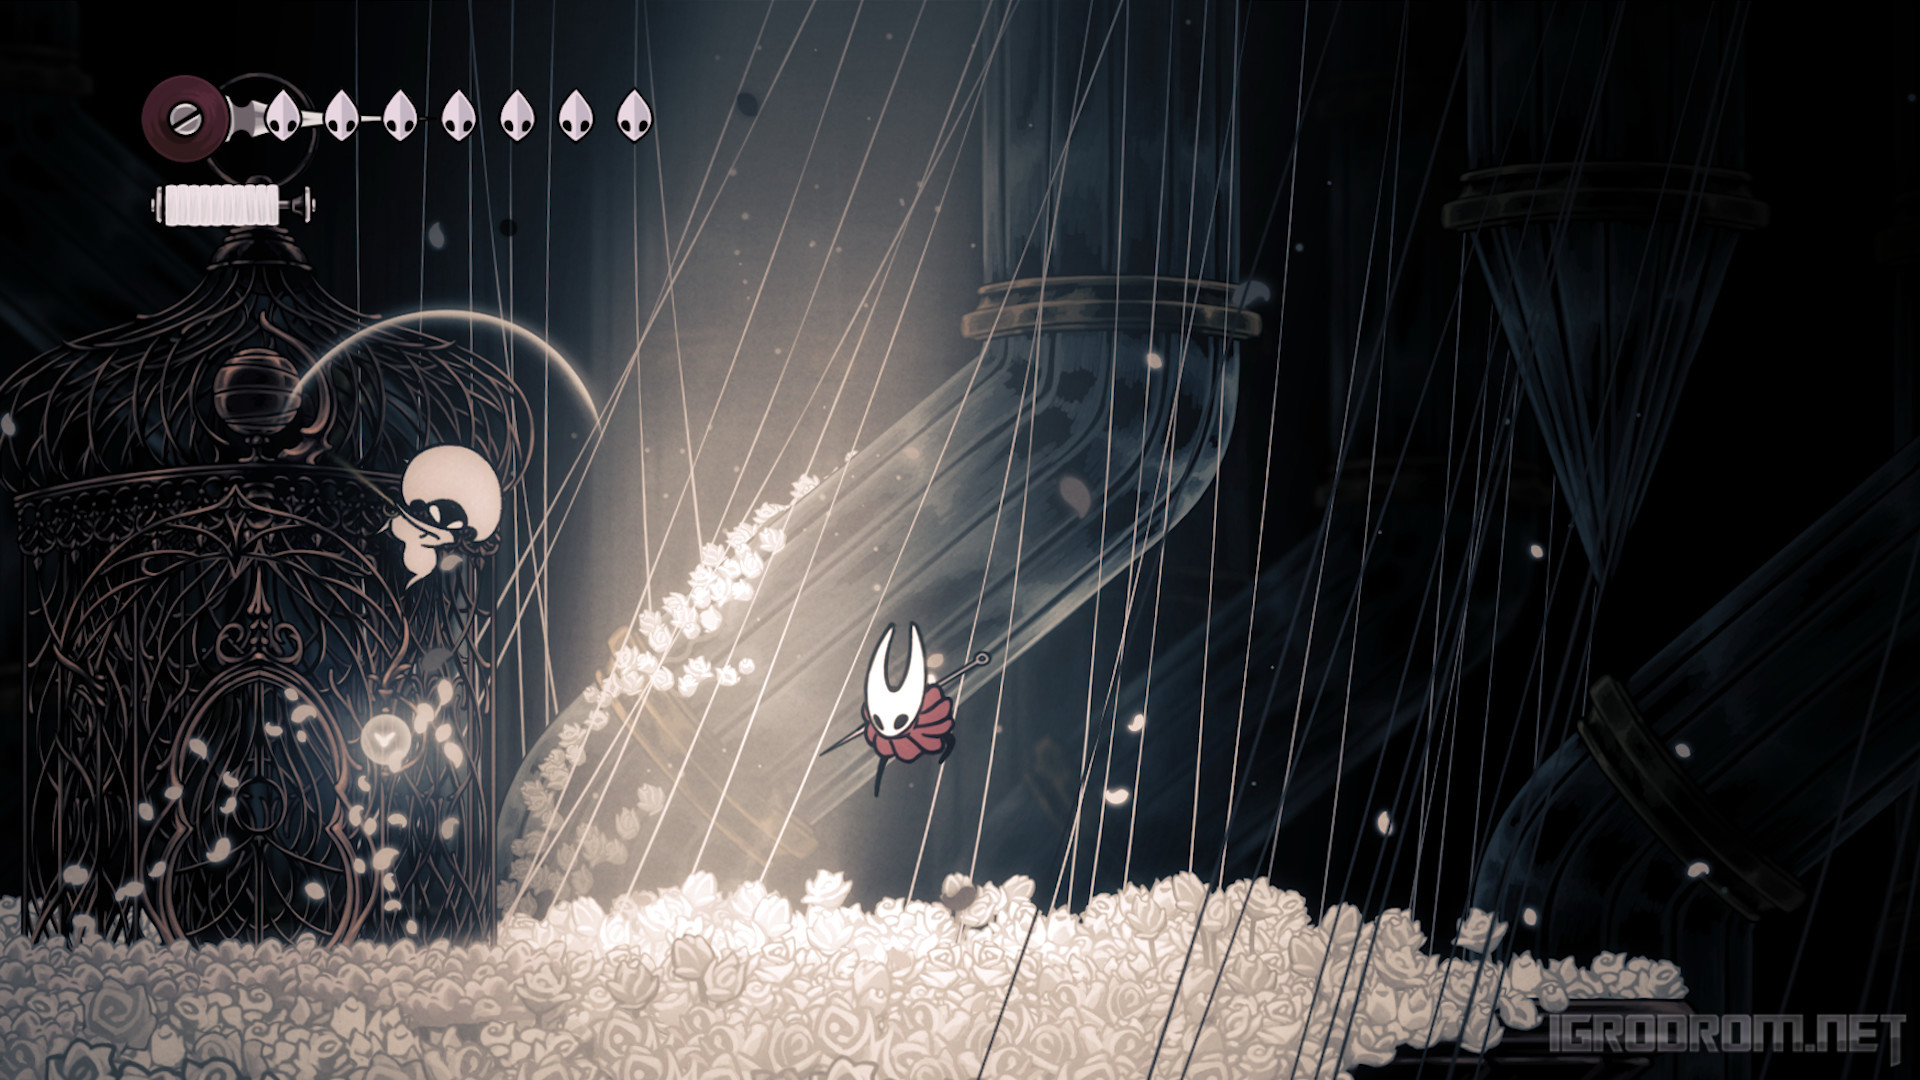 instal the new for ios Hollow Knight: Silksong